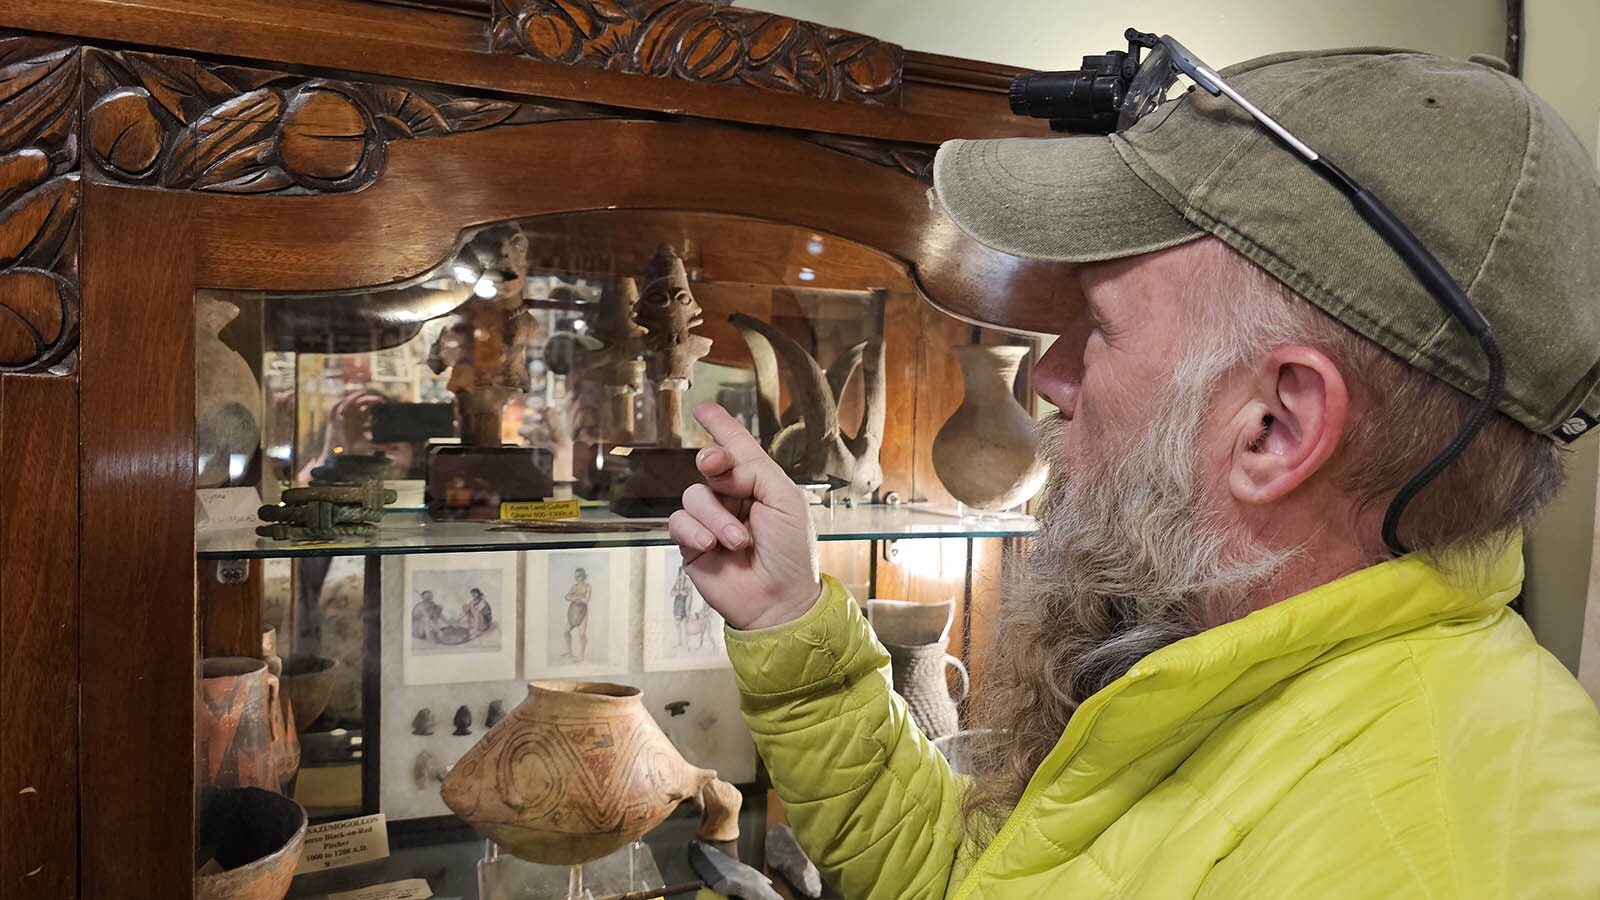 Brian Snyder has curiosities from all over the world at his shop Bohemian Metals in Cheyenne.